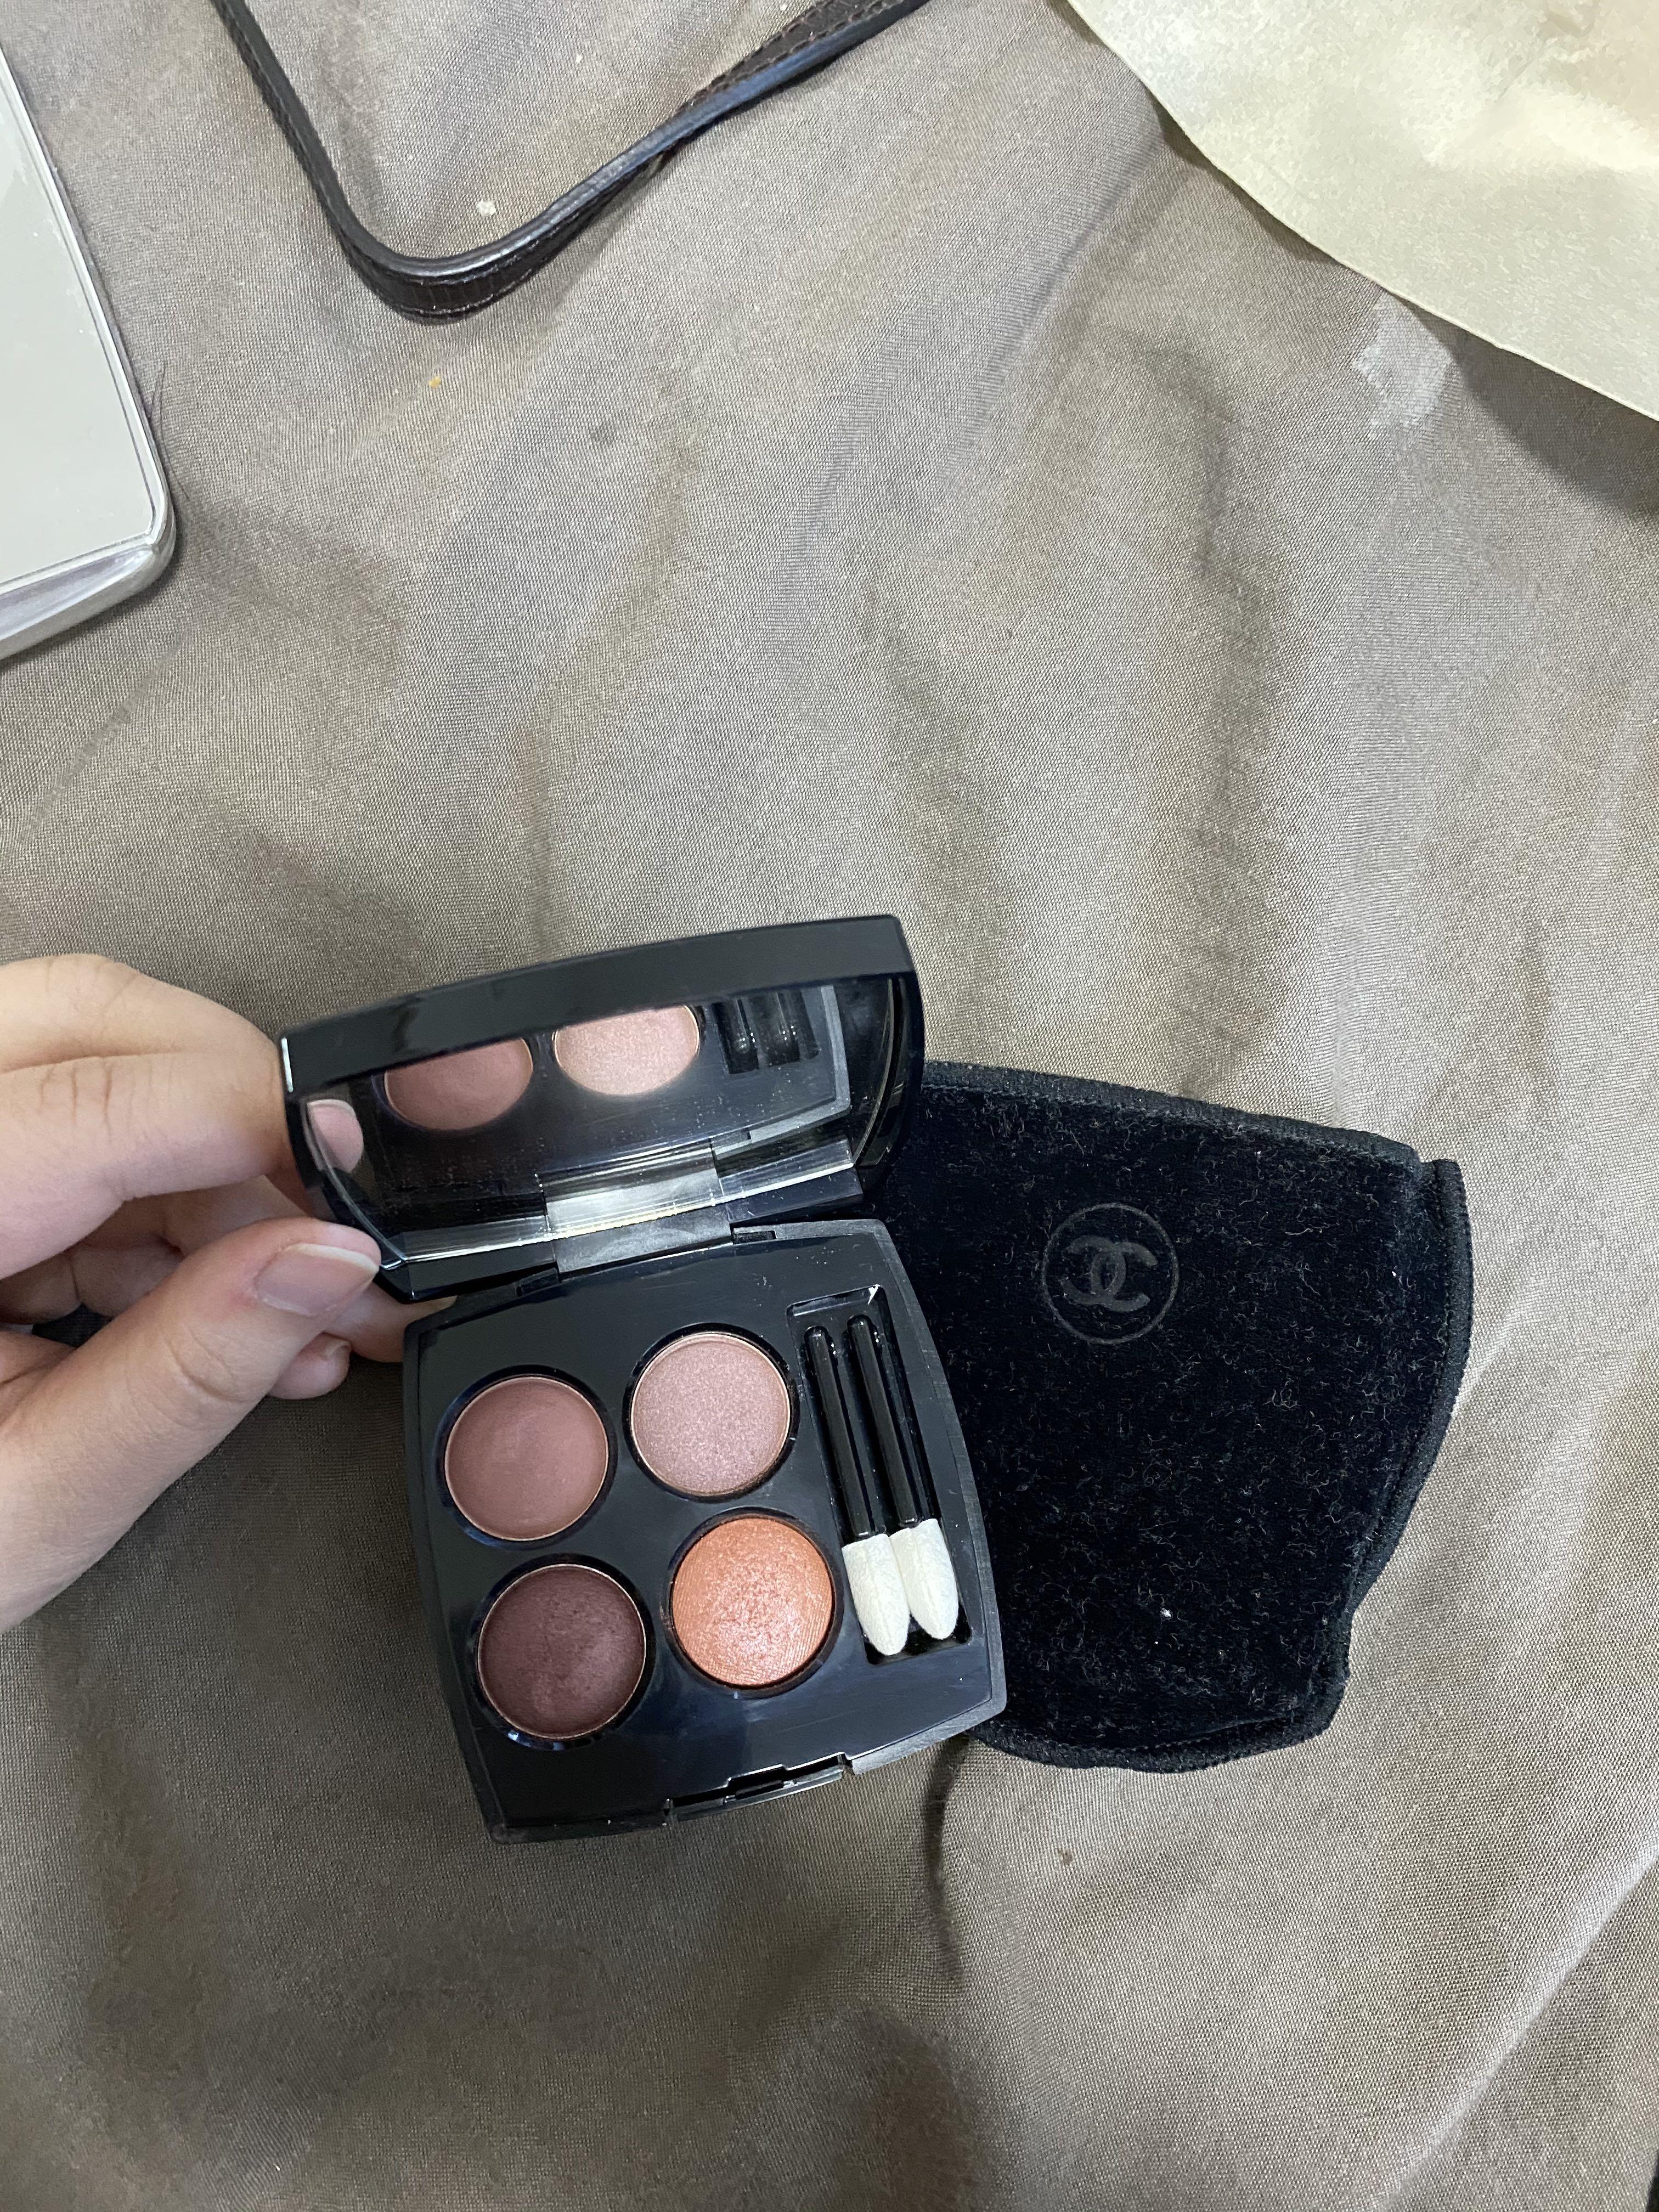 Chanel Les 4 Ombres Multi-Effect Quadra Eyeshadow in 354 Warm Memories  Archives - Reviews and Other Stuff